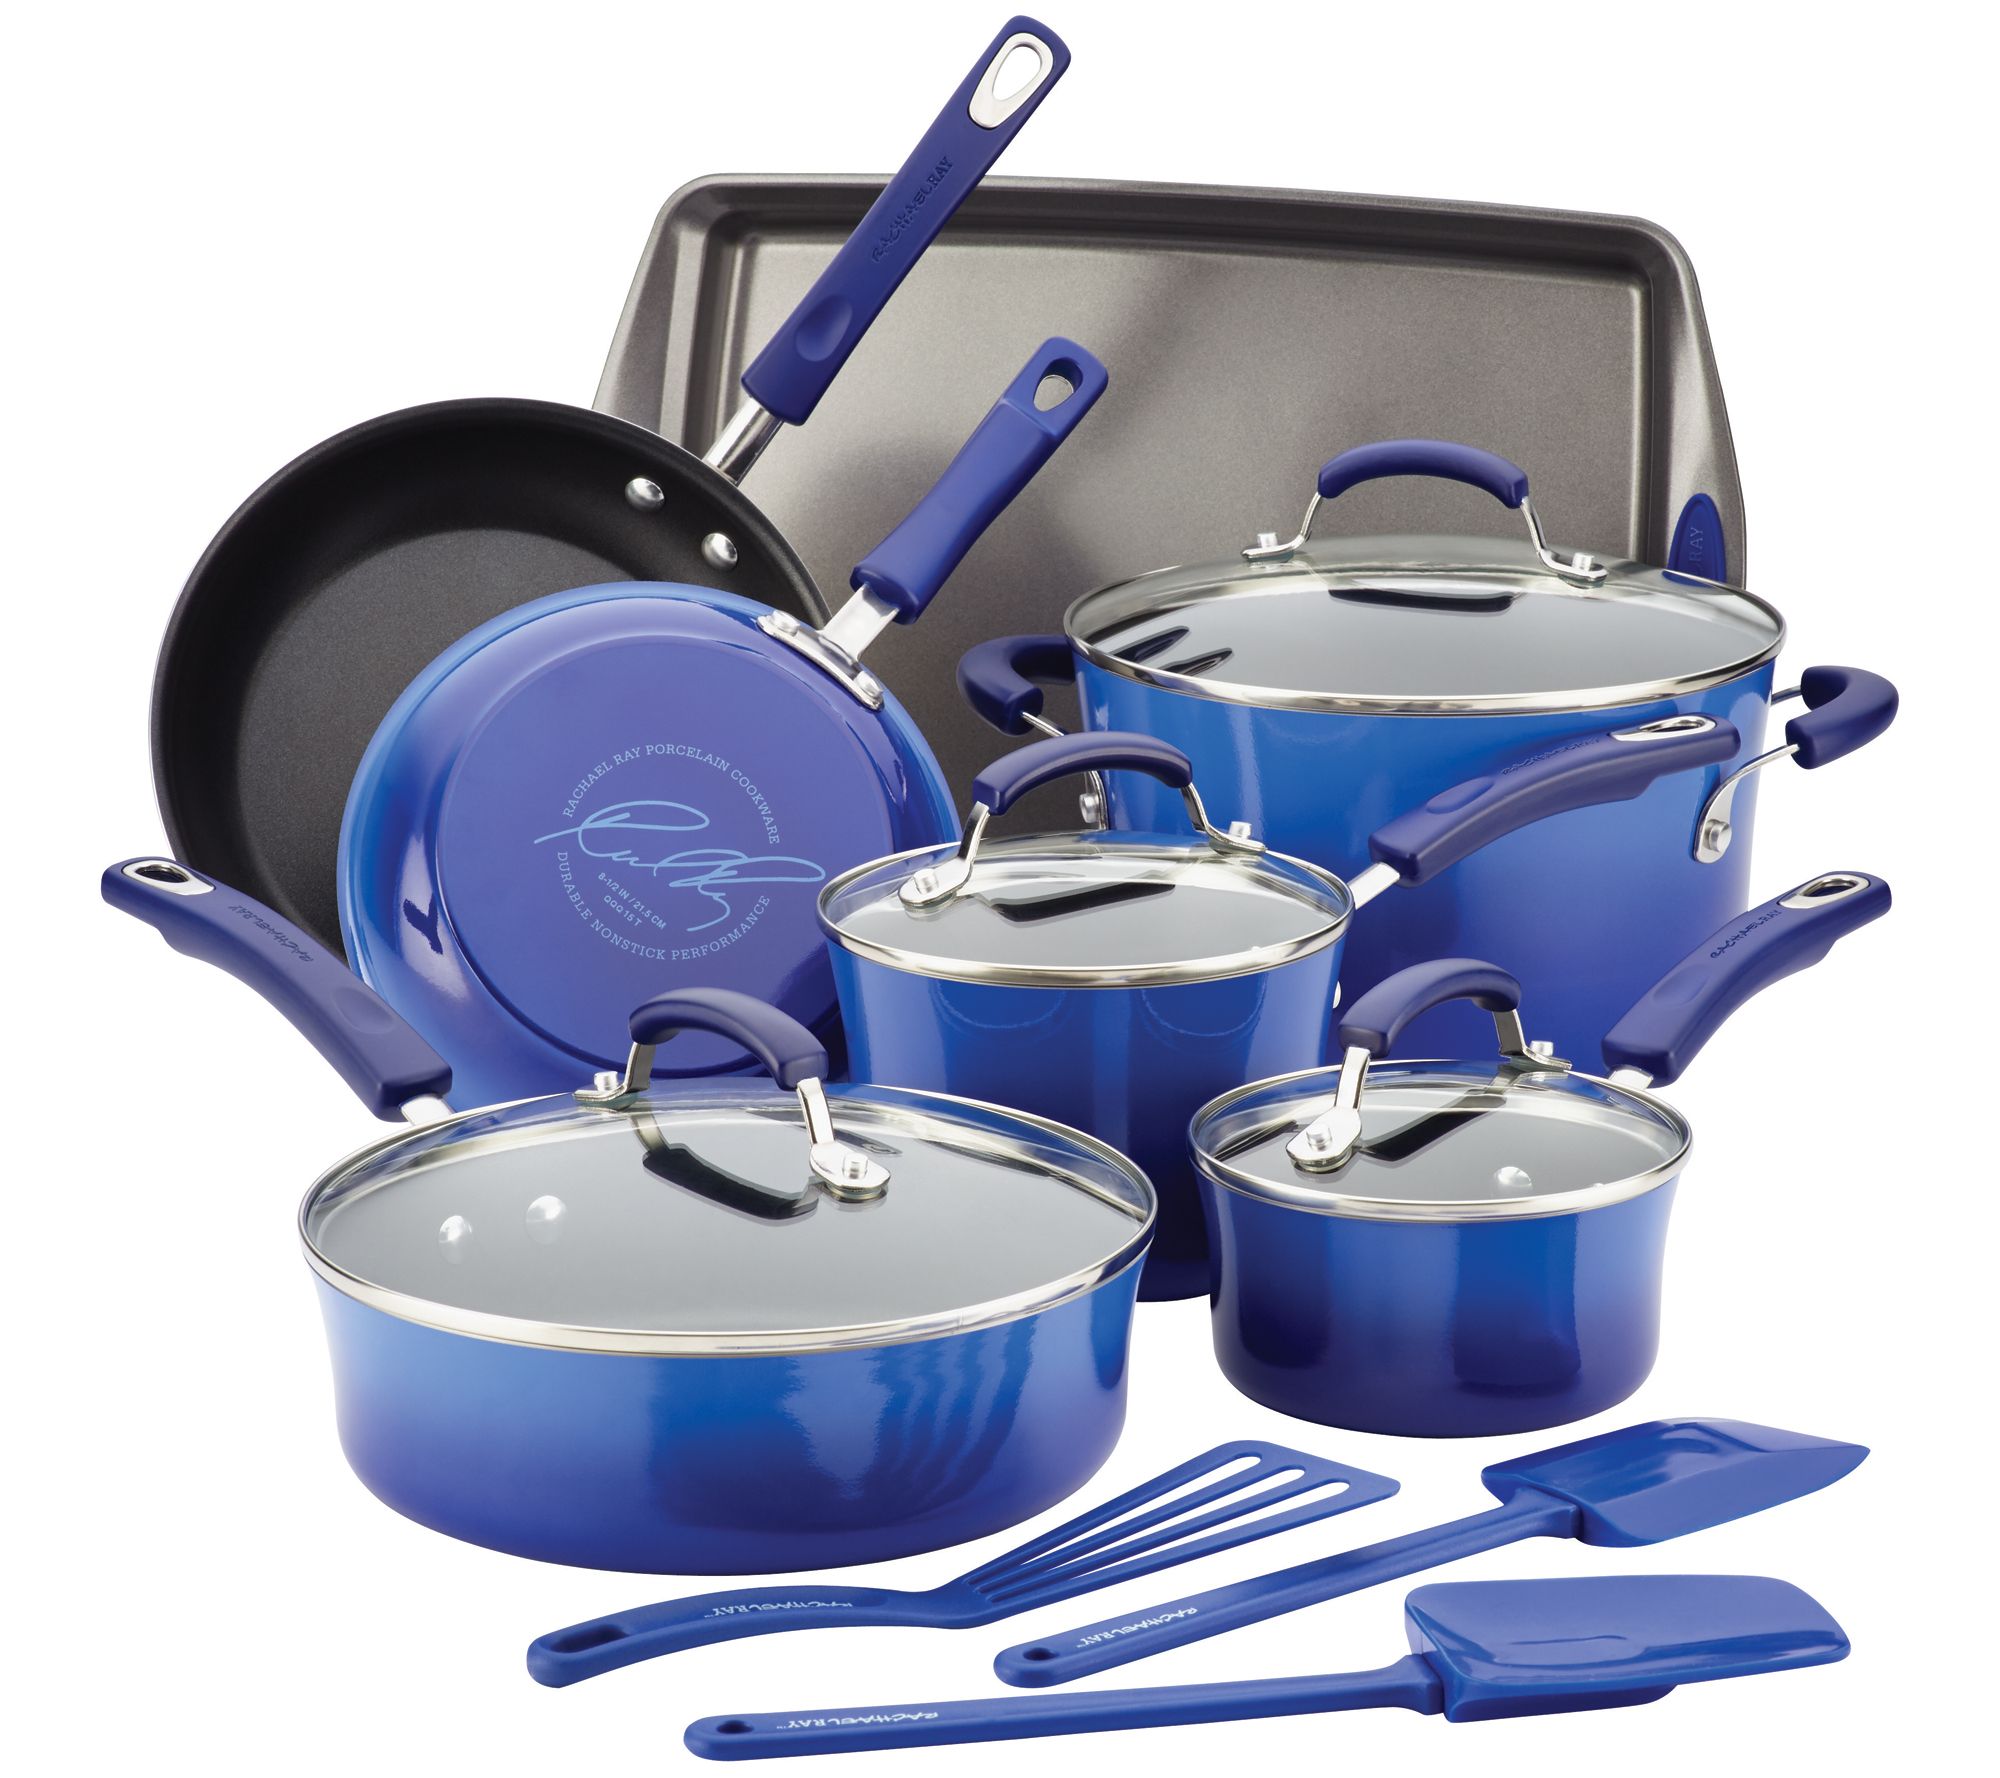 Rachael Ray 14-Piece Cookware Set Only $79.99 Shipped on Macy's